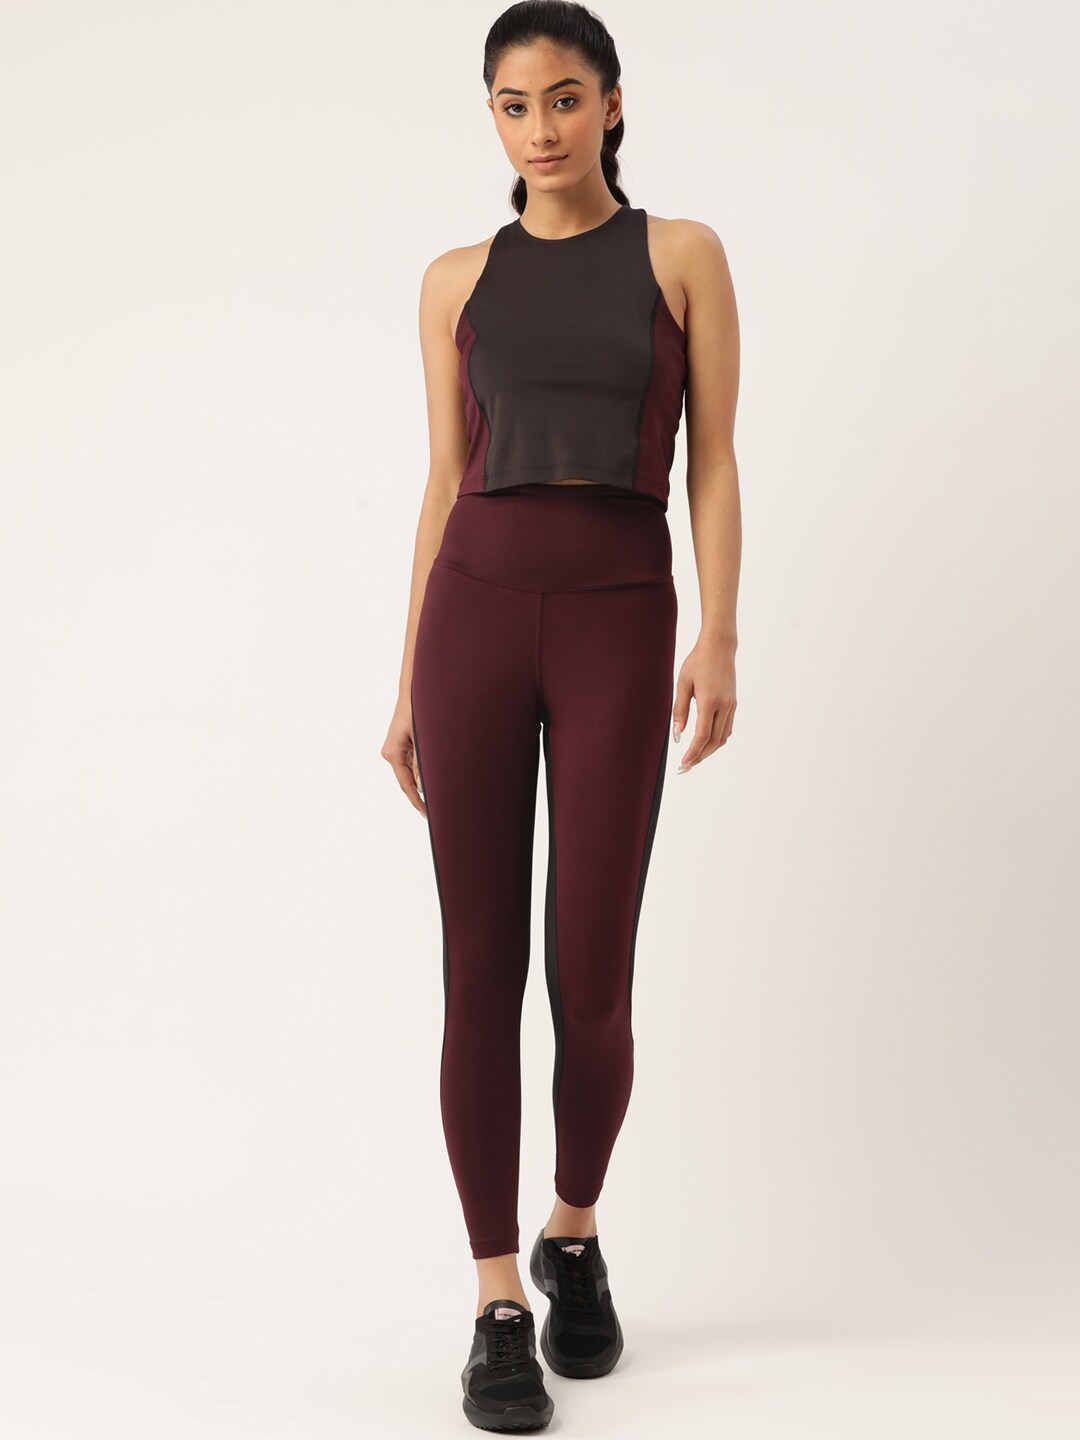 KICA Women Burgundy & Black Colourblocked High-Rise Tracksuit Price in India